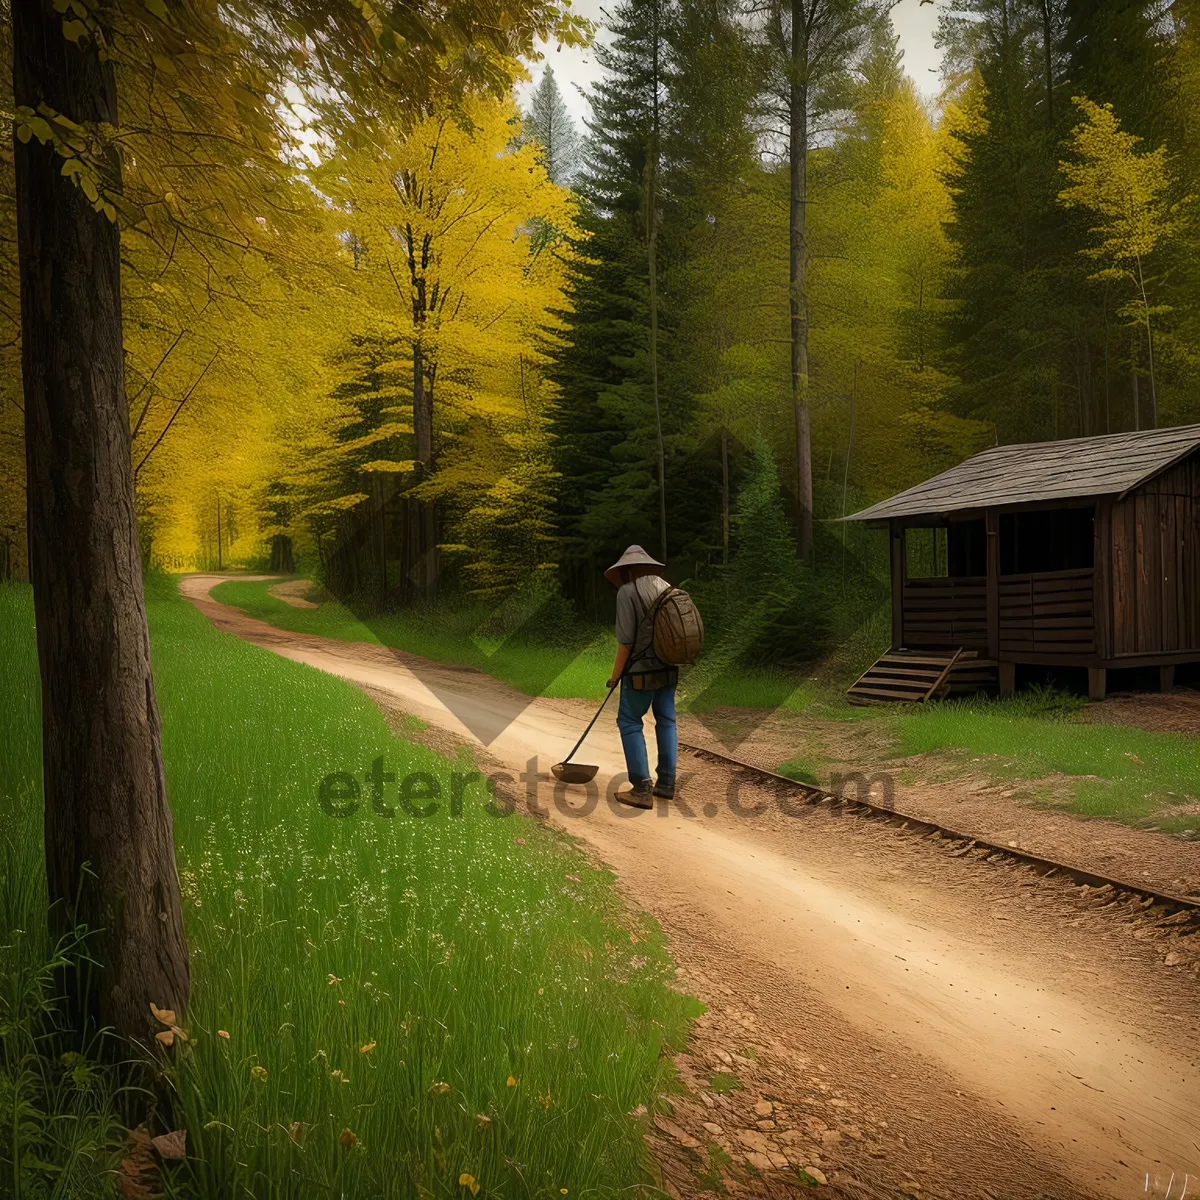 Picture of Man Walking through Serene Forest Landscape